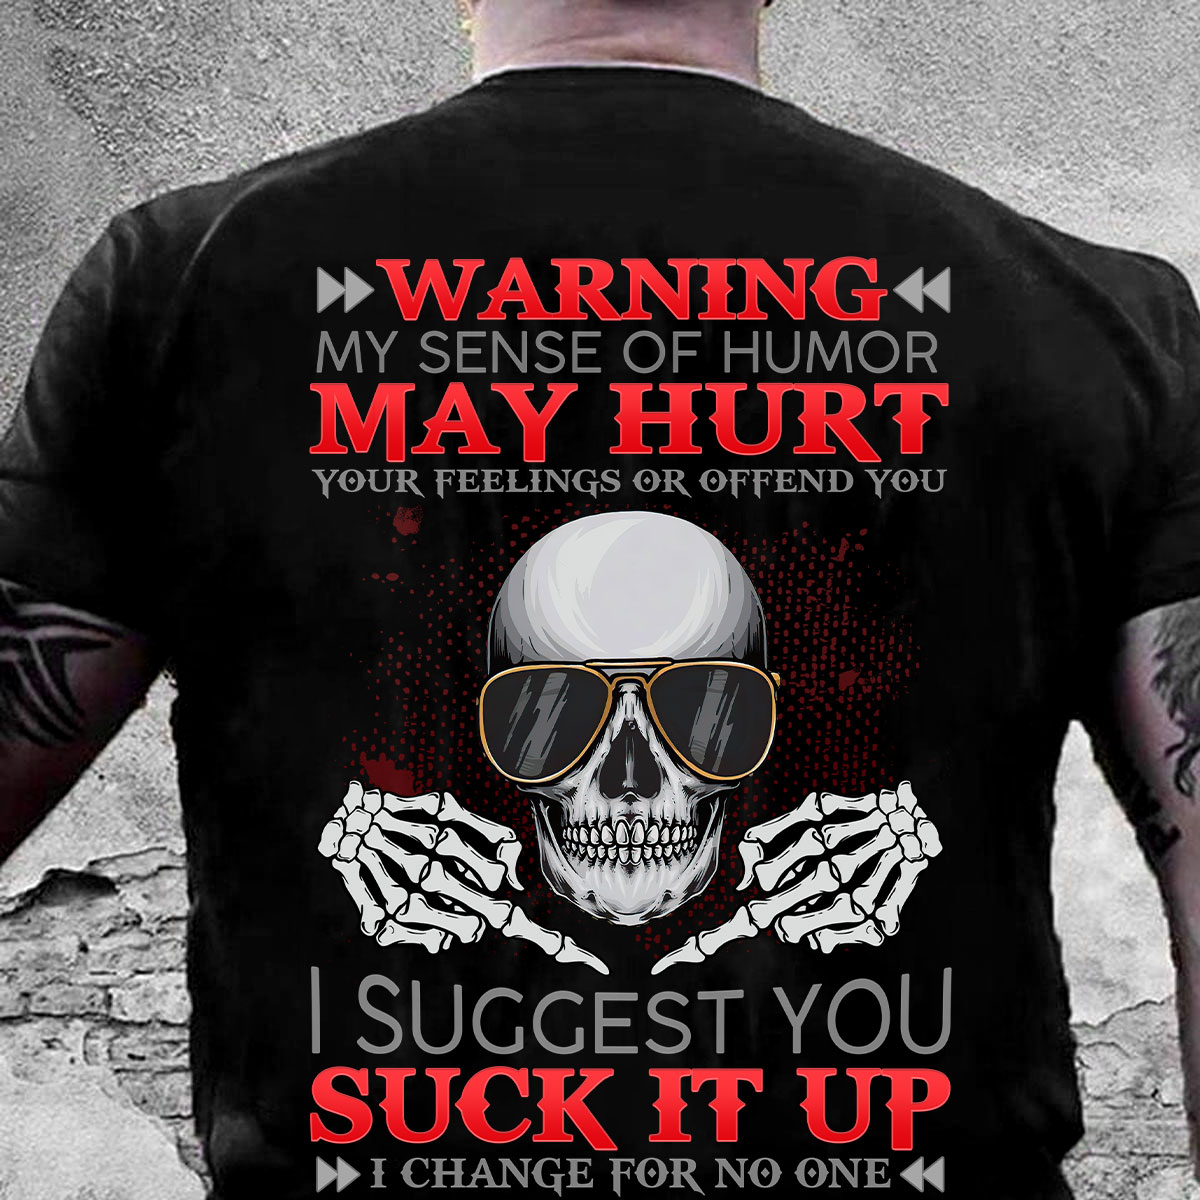 Warning my sense of humor may hurt your feelings or offend you I sugguest you suck it up - Evil skullcap